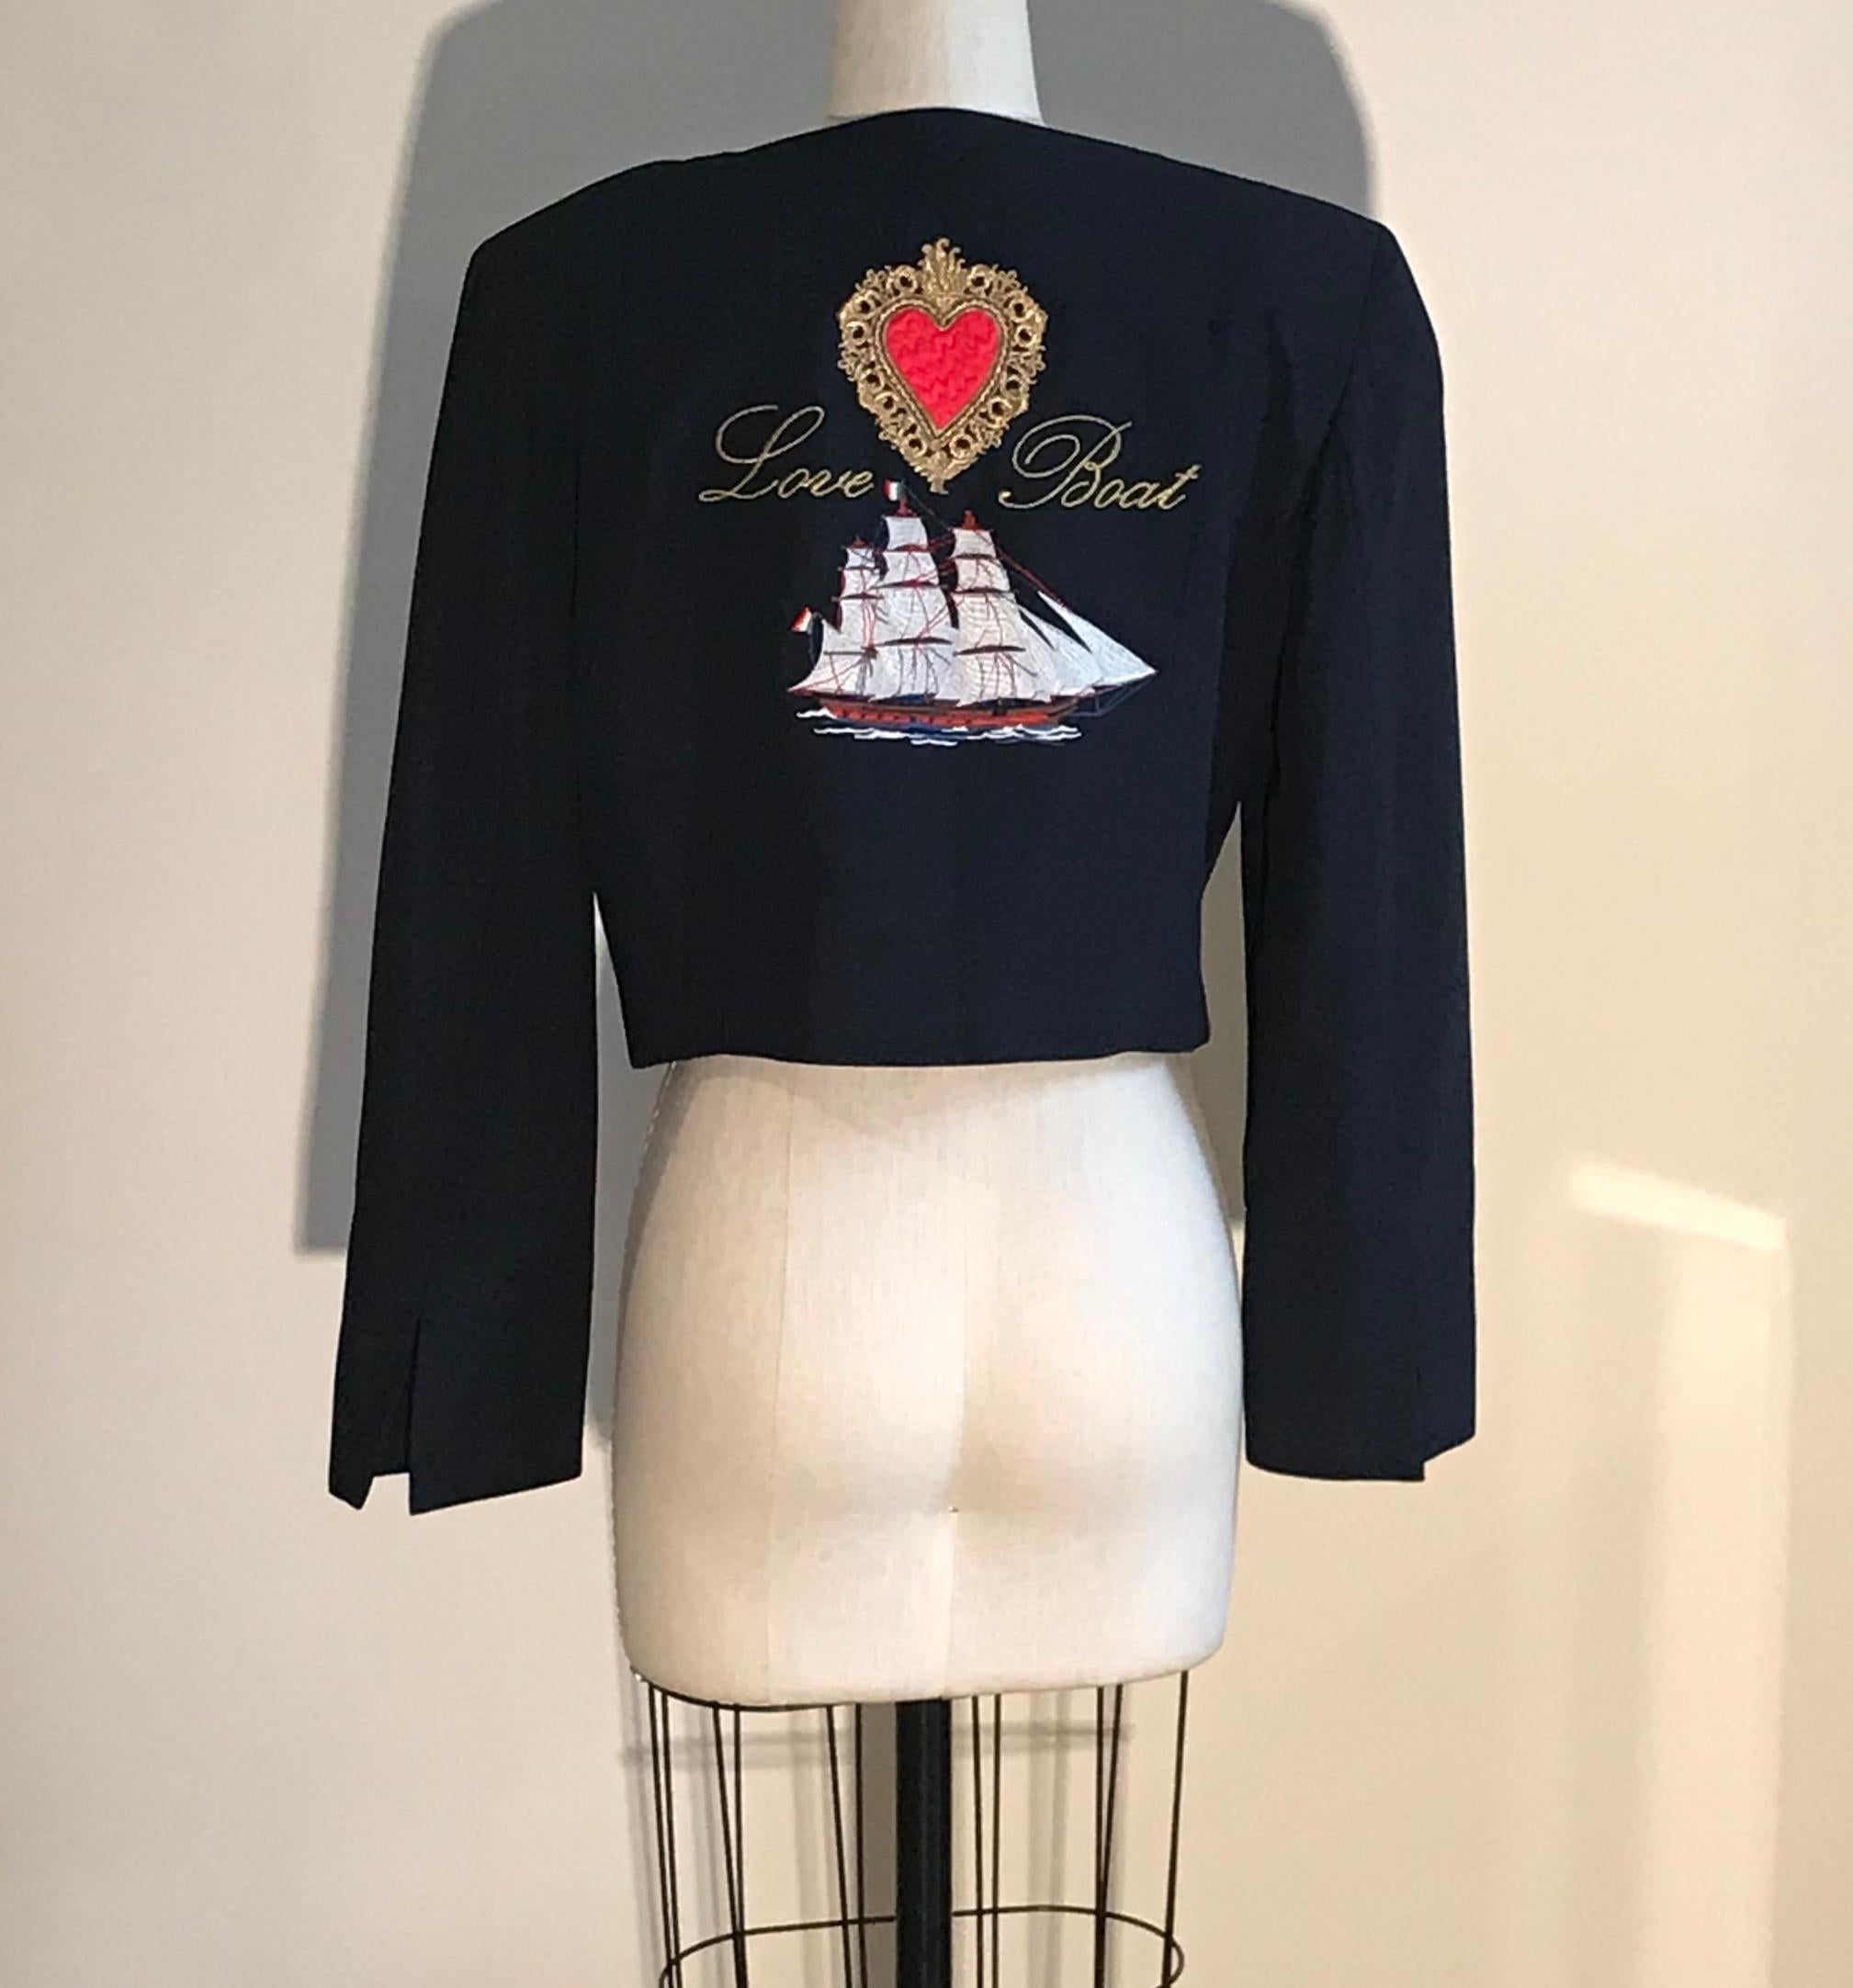 Moschino Couture 1980's 'Love Boat' jacket with double row of gold and faux pearl life-ring chain buttons at front from one of Franco Moschino's 'Cruise Me Baby' resort collections. Love boat embroidery at back features sailboat with Italian flag at